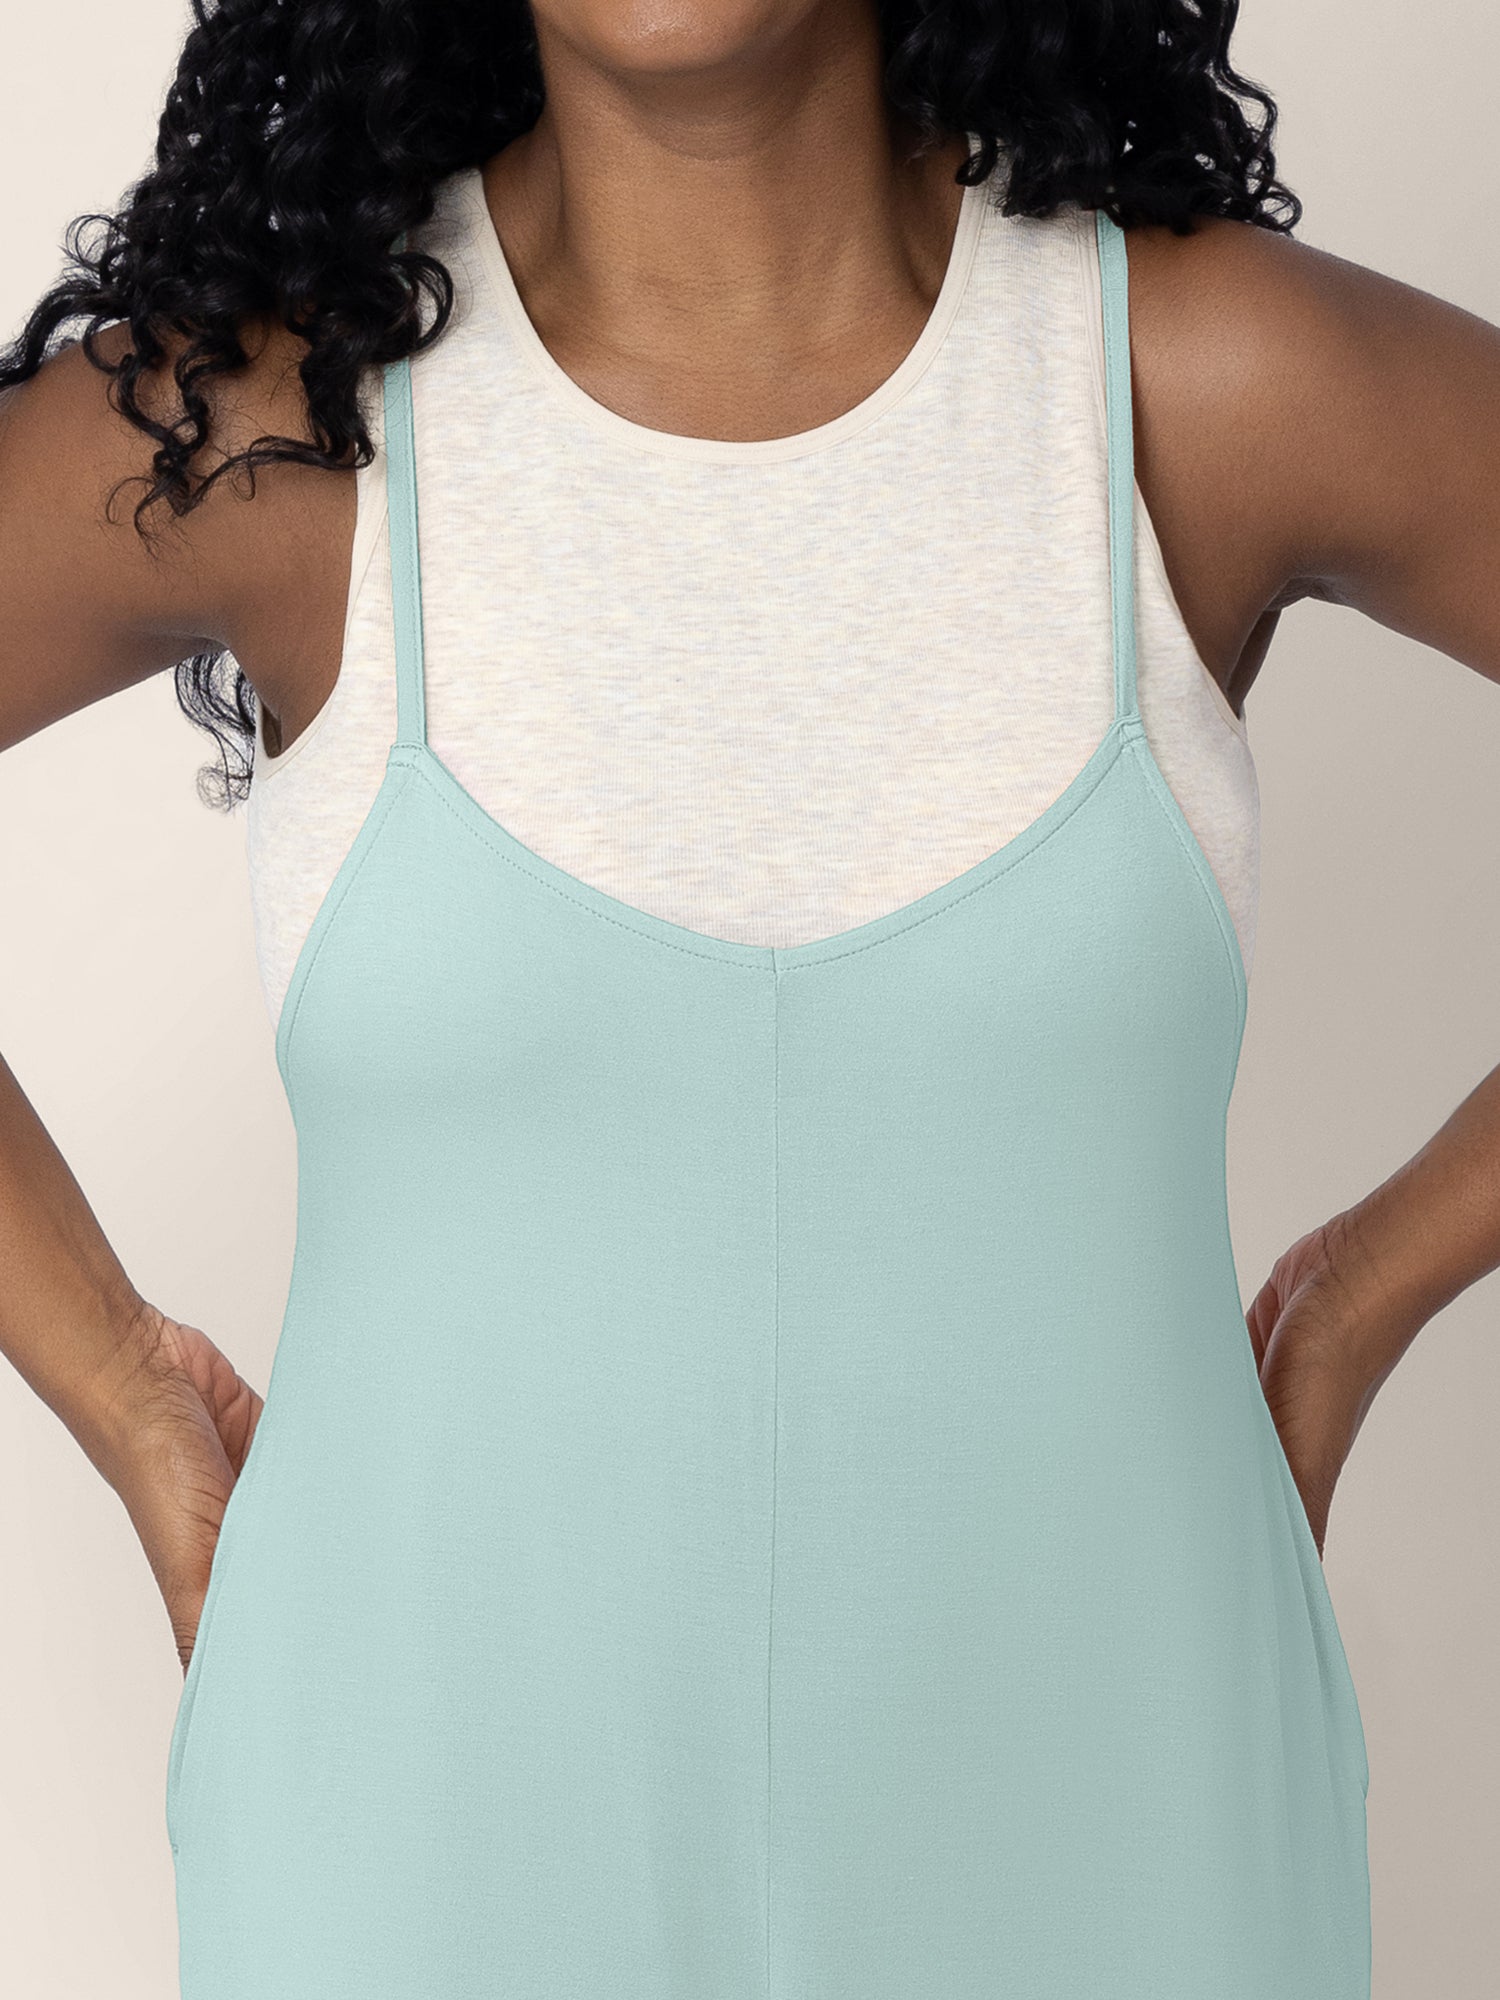 A close up shot of a model wearing the Charlie Maternity & Nursing Romper in Dusty Blue Green, showing the easy pull down nursing access